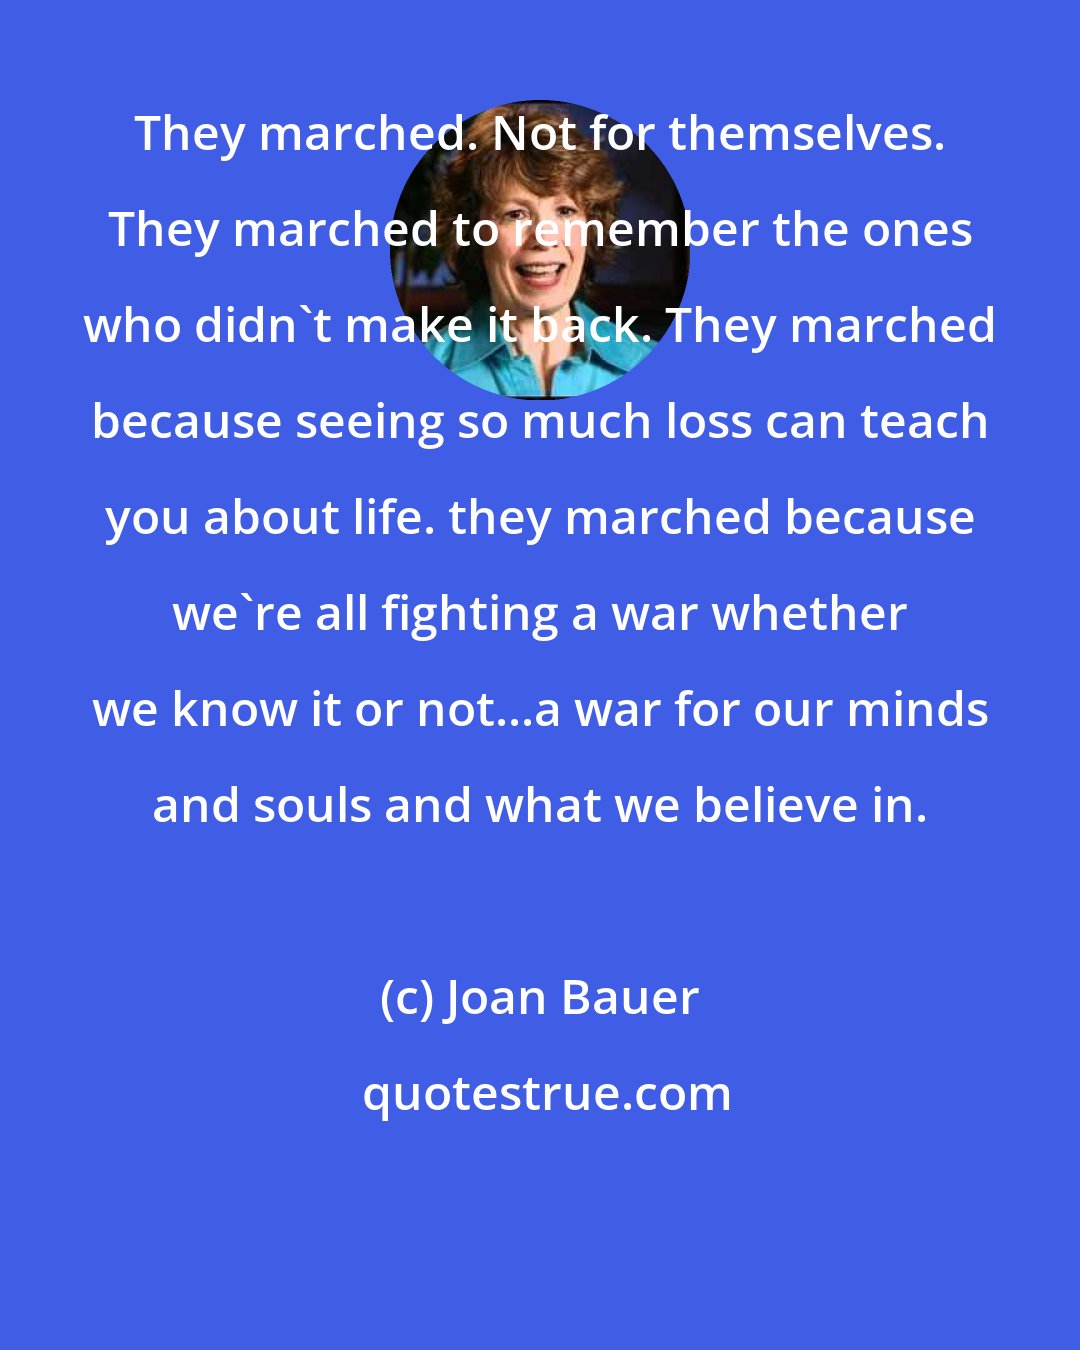 Joan Bauer: They marched. Not for themselves. They marched to remember the ones who didn't make it back. They marched because seeing so much loss can teach you about life. they marched because we're all fighting a war whether we know it or not...a war for our minds and souls and what we believe in.